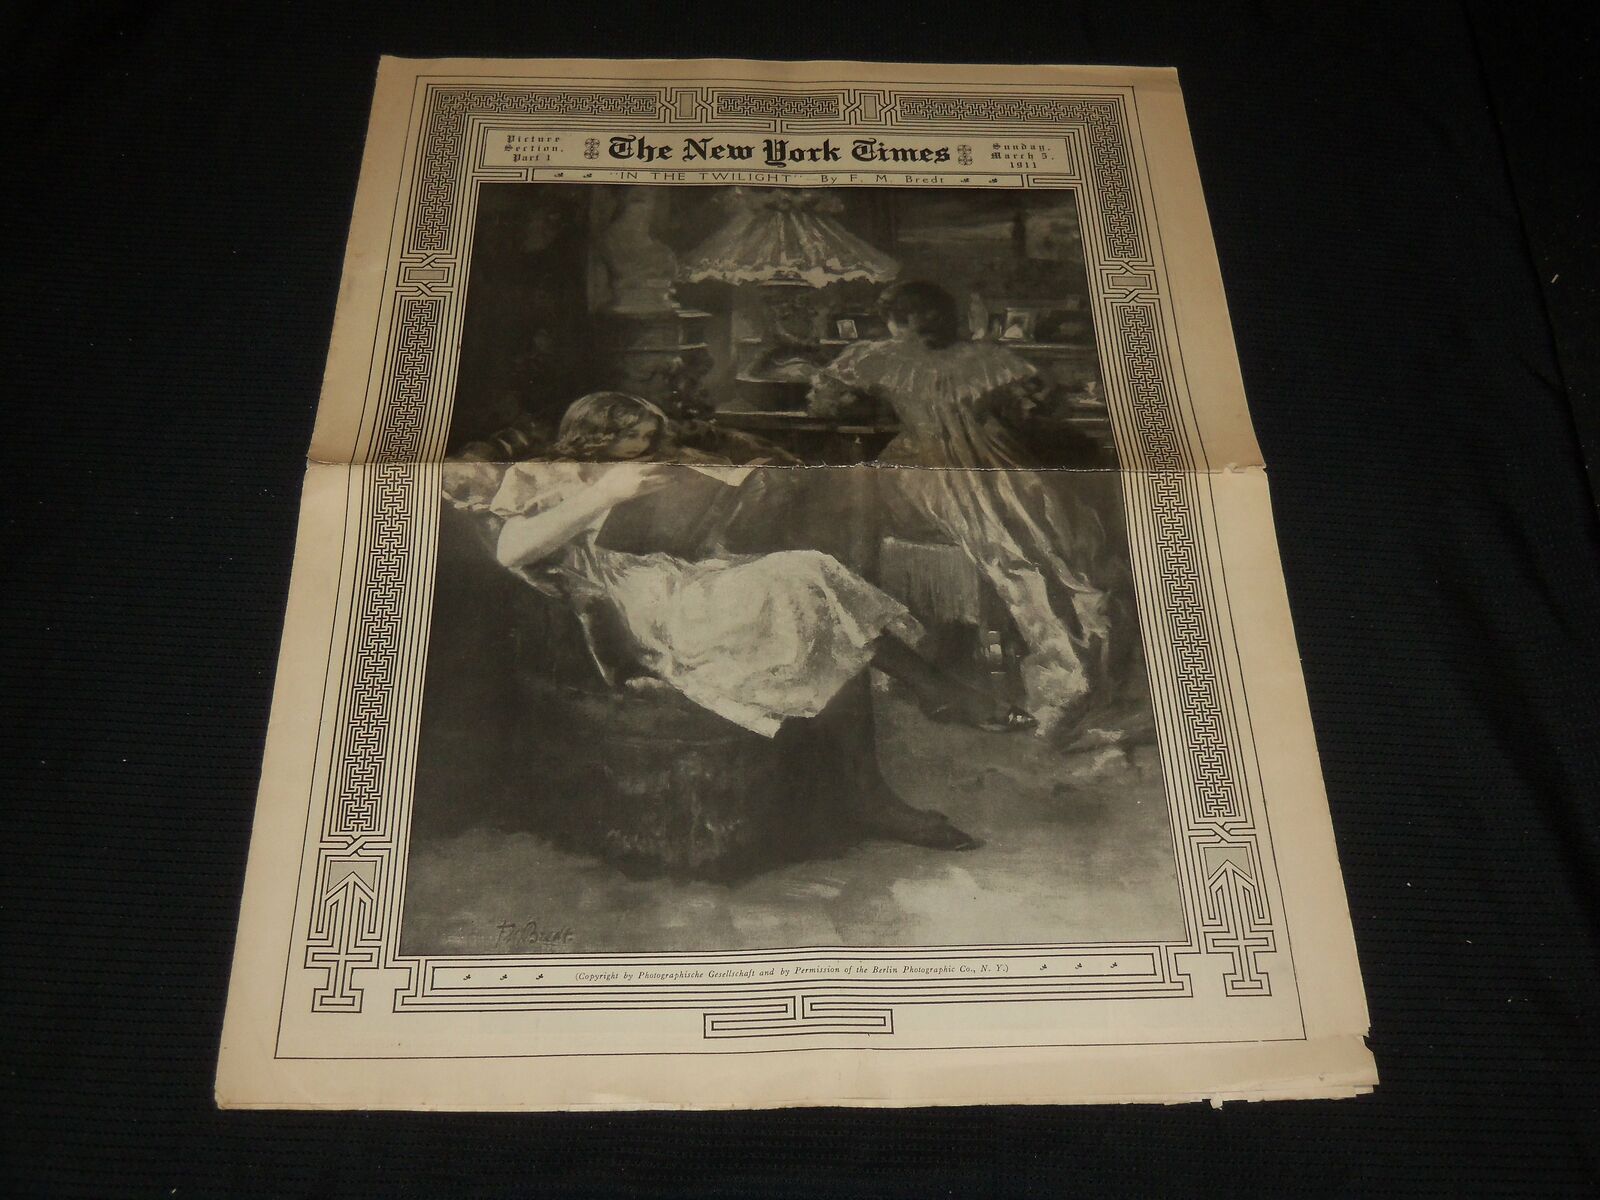 1911 MARCH 5 NEW YORK TIMES PICTURE SECTION - IN THE TWILIGHT - BREDT - NP 5633